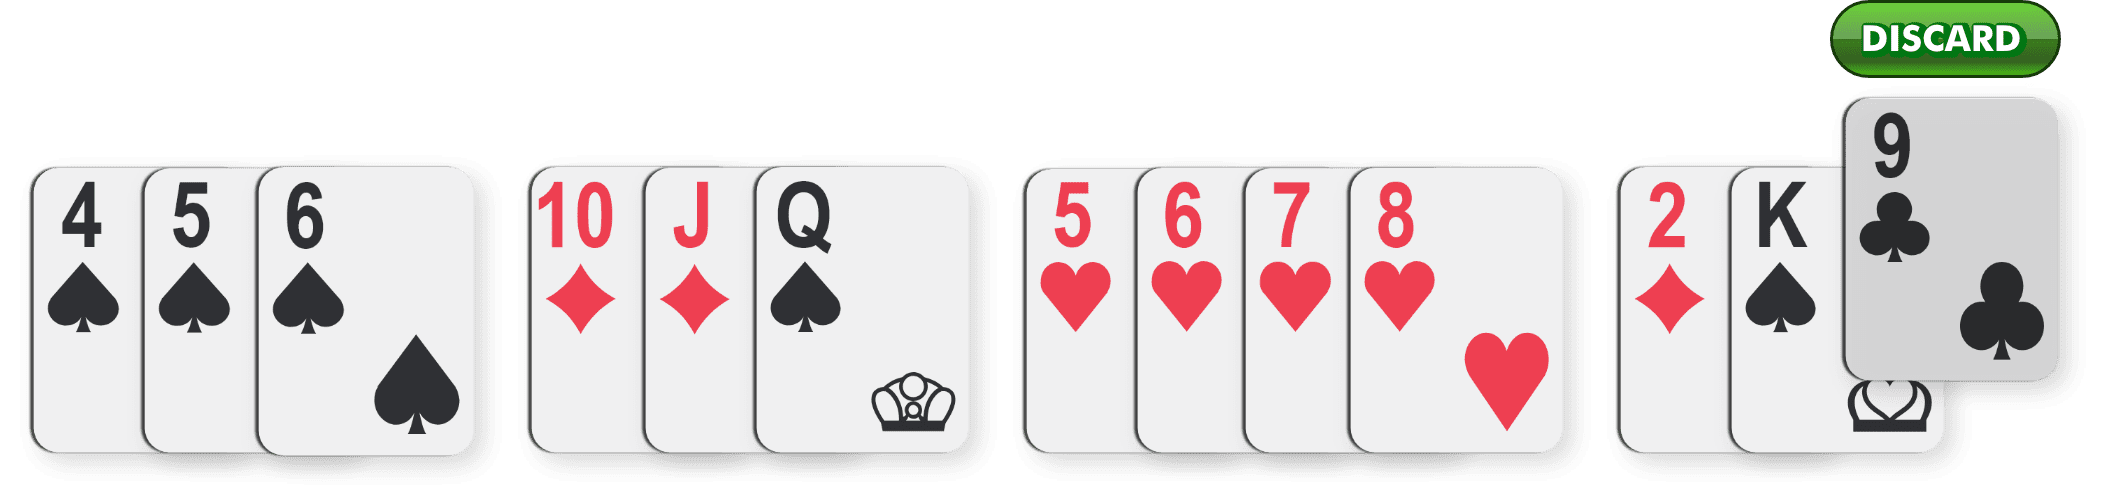 How to Discard Rummy Card Game